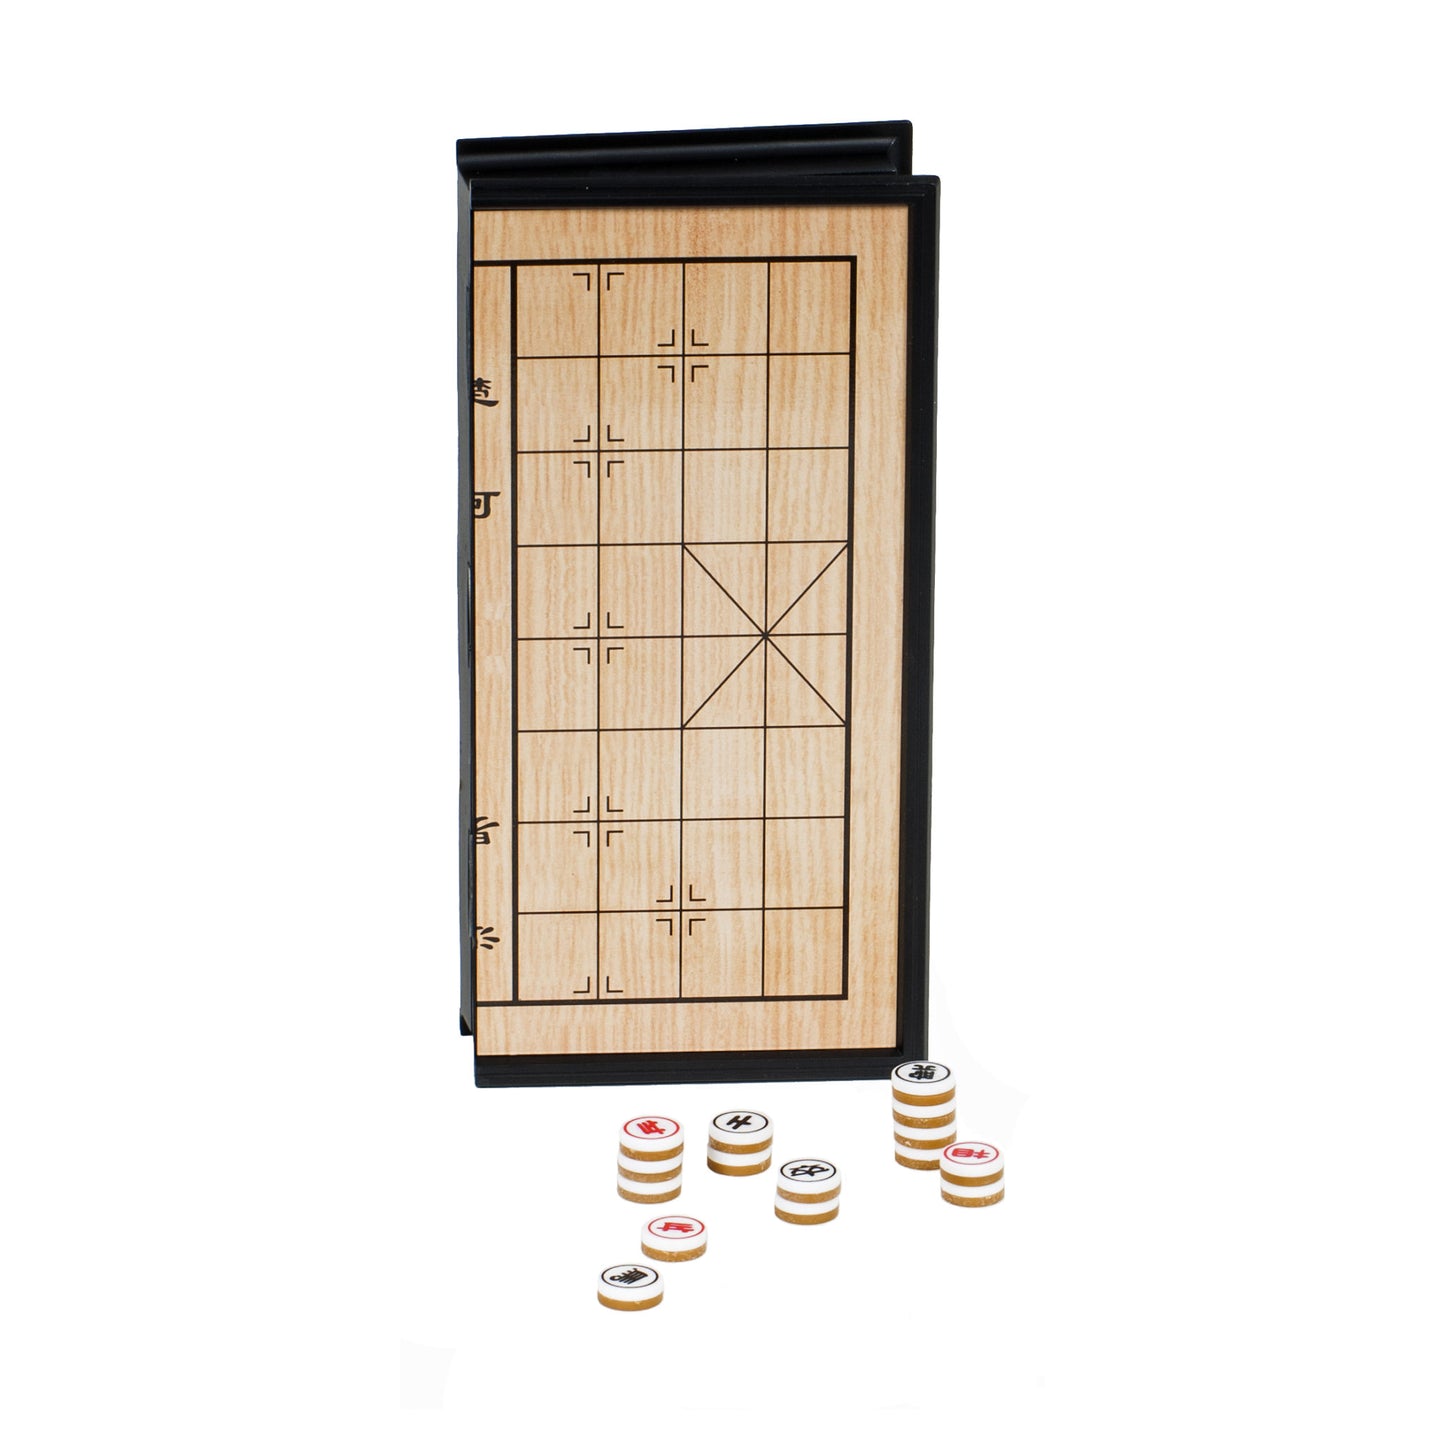 Magnetic Chinese Chess Set – 10 inches